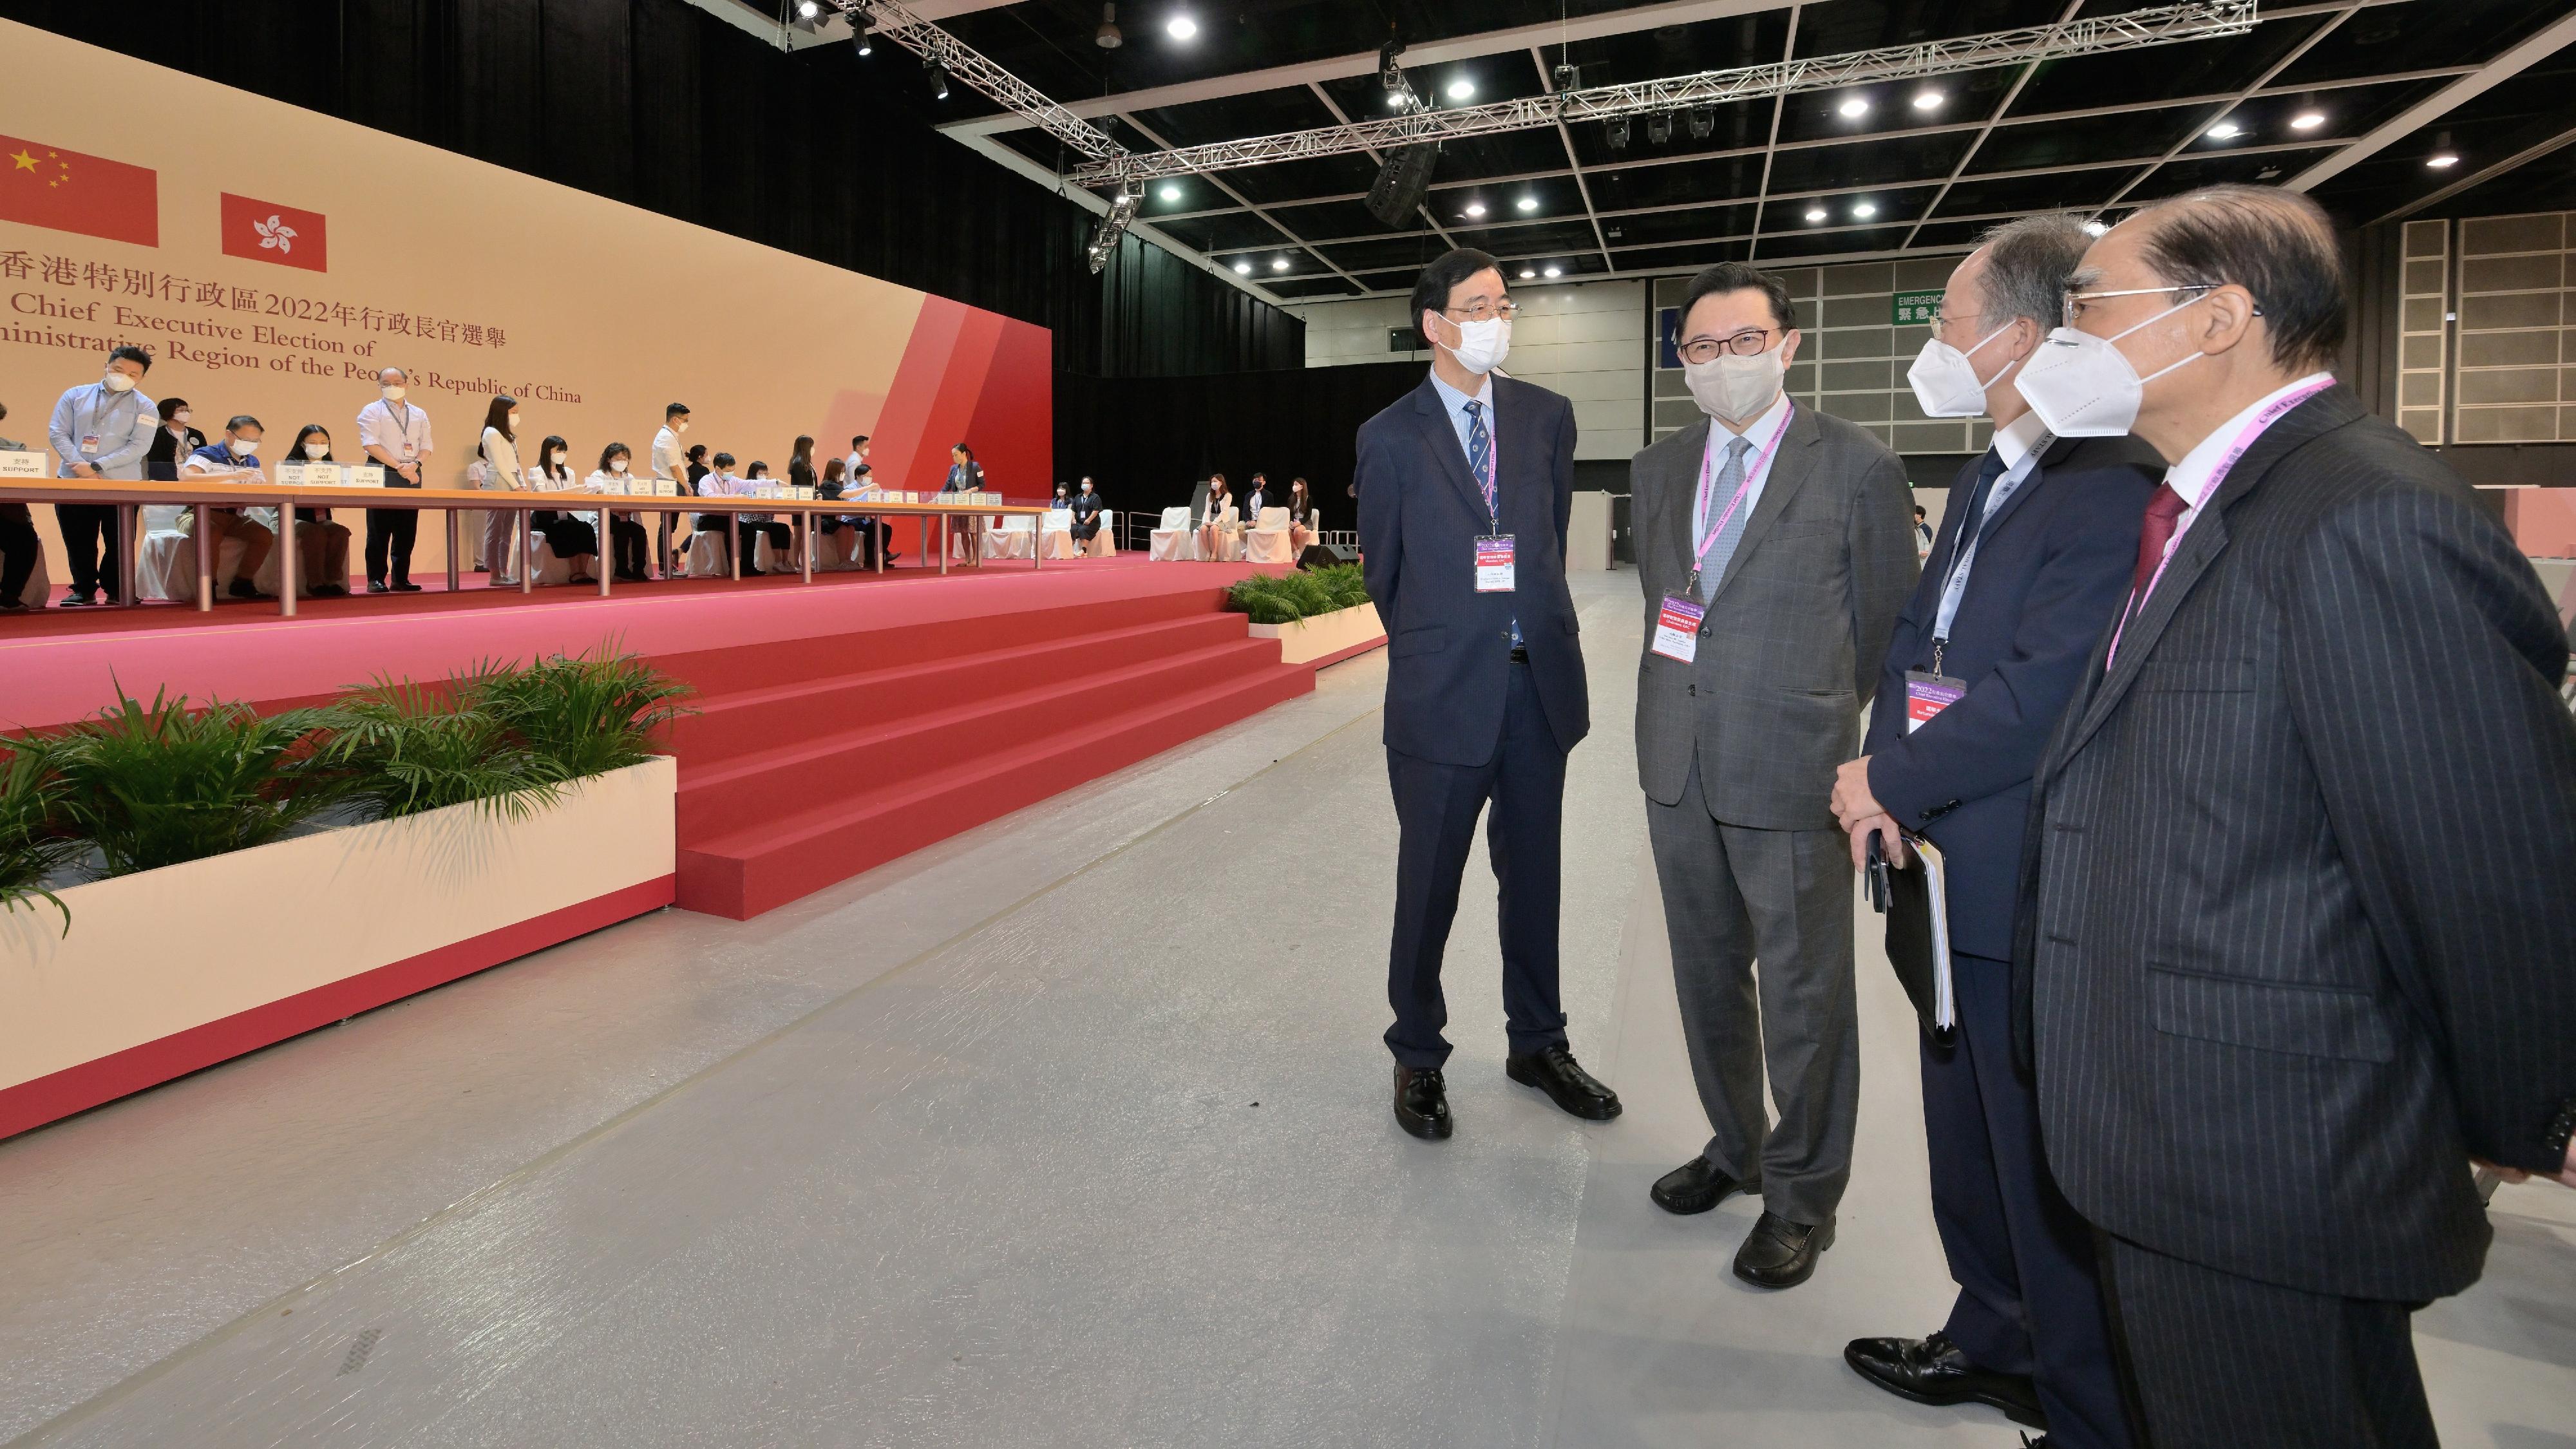 The Chairman of the Electoral Affairs Commission (EAC), Mr Justice Barnabas Fung Wah (third right), EAC members Mr Arthur Luk, SC (first right), and Professor Daniel Shek (fourth right), and the Returning Officer, Mr Justice Keith Yeung Kar-hung (second right), visit the central counting station cum media centre of the 2022 Chief Executive Election at the Hong Kong Convention and Exhibition Centre in Wan Chai today (May 7).